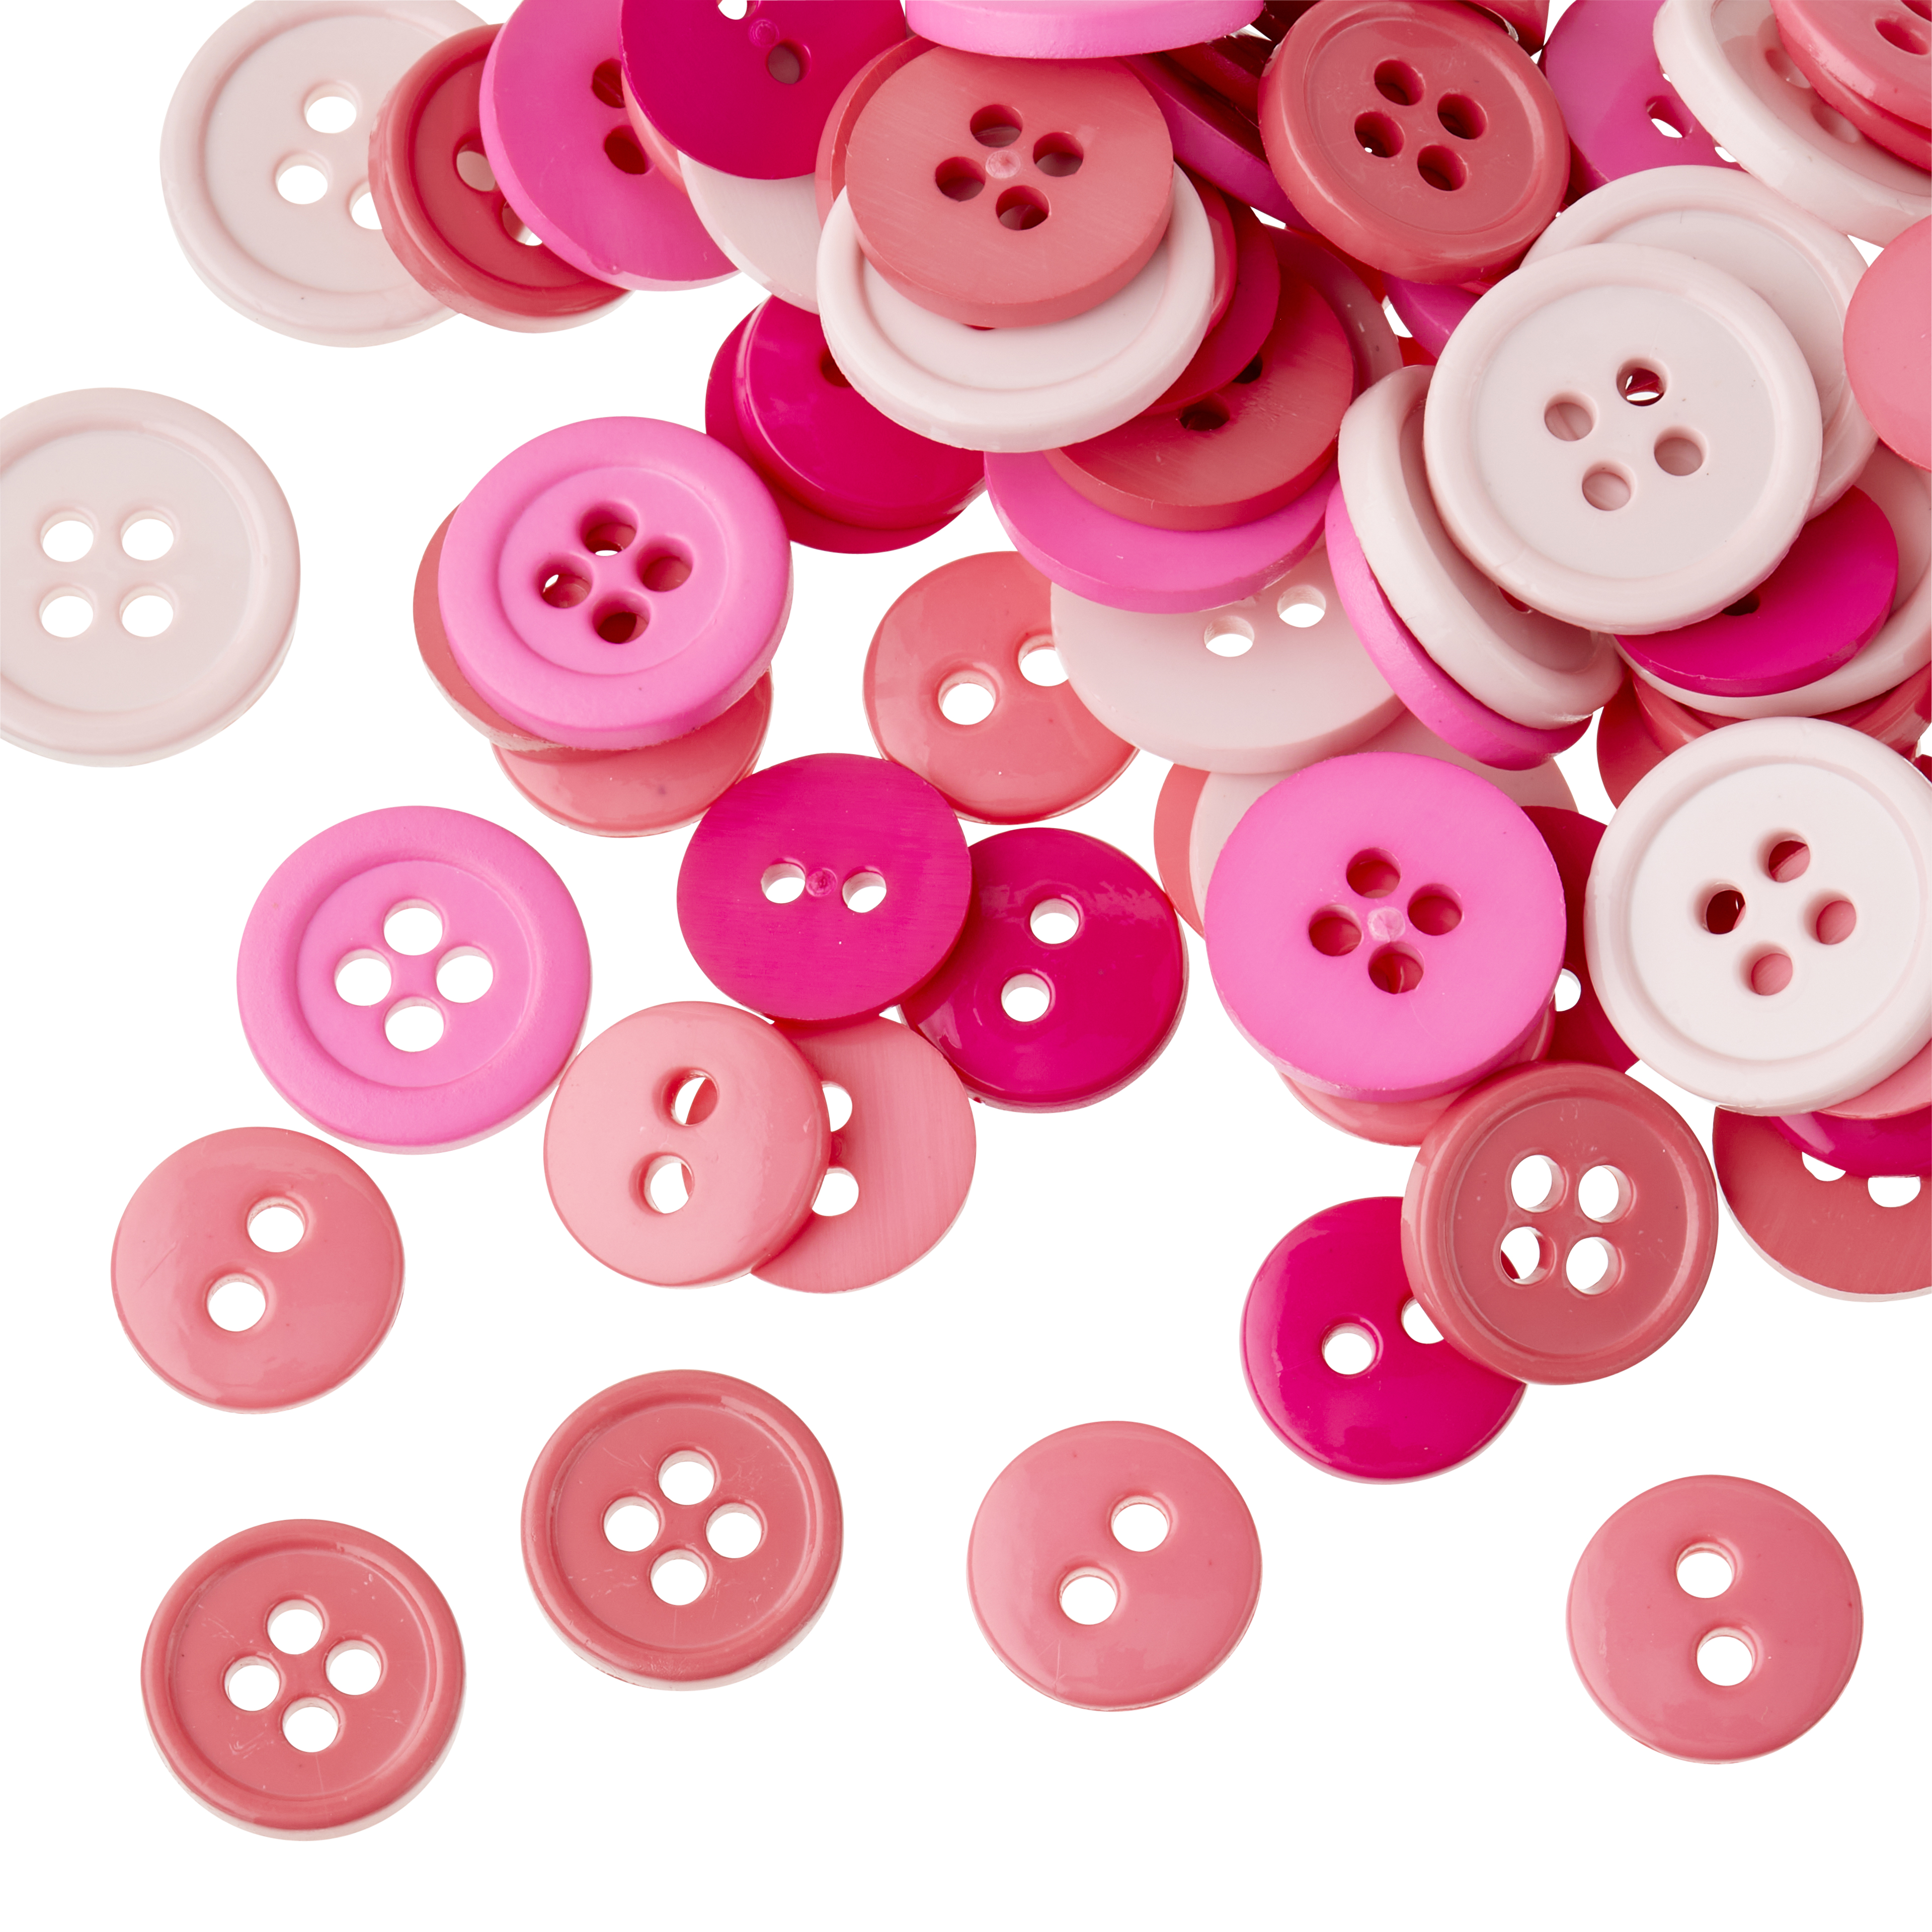 Shop for the Favorite Findings™ Buttons, Pink Assortment at Michaels